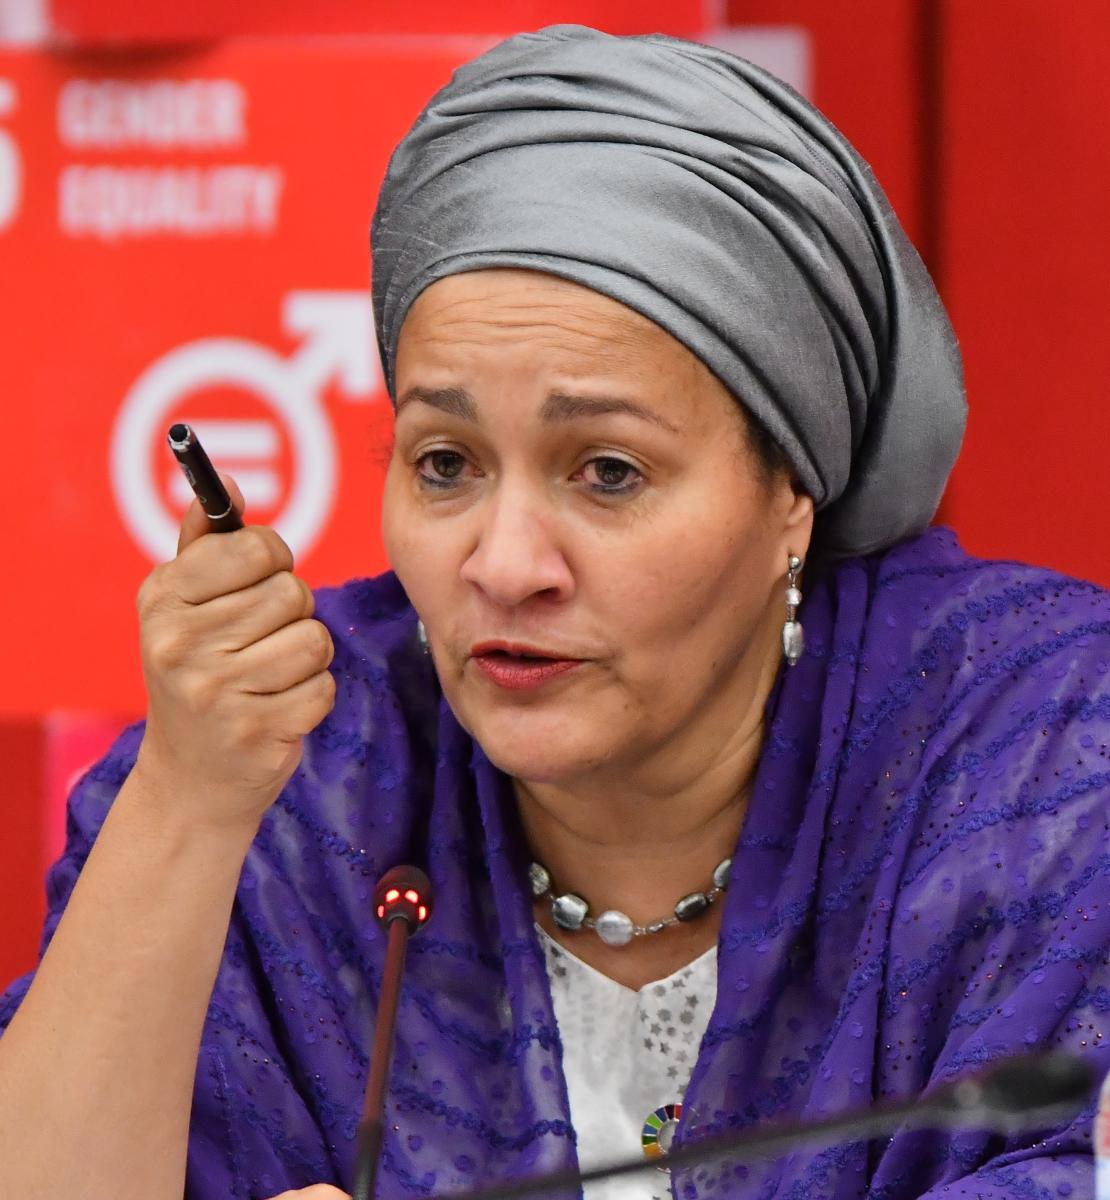 Deputy Secretary-General Amina J. Mohammed thanked Resident Coordinators in Africa for their leadership and commitment to supporting all countries and their people at a time of profound global challenge.